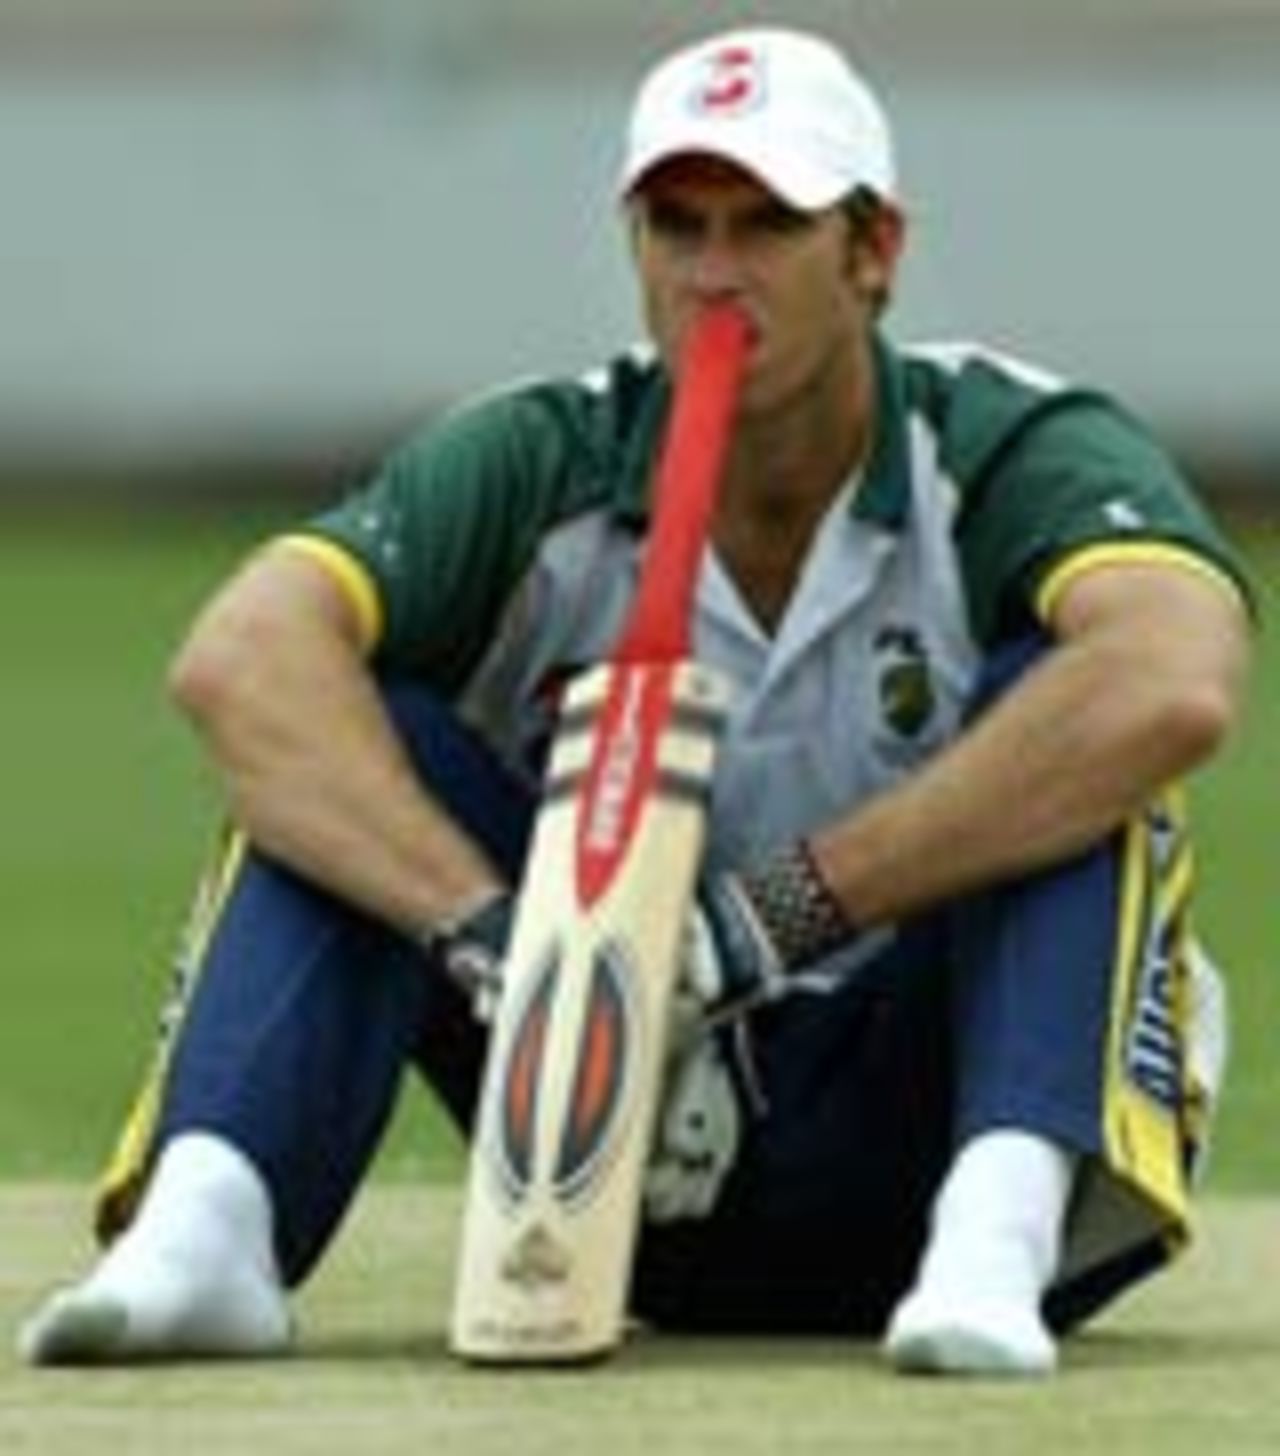 Hayden sits on the wicket at the 'Gabba, India v Australia, 2003